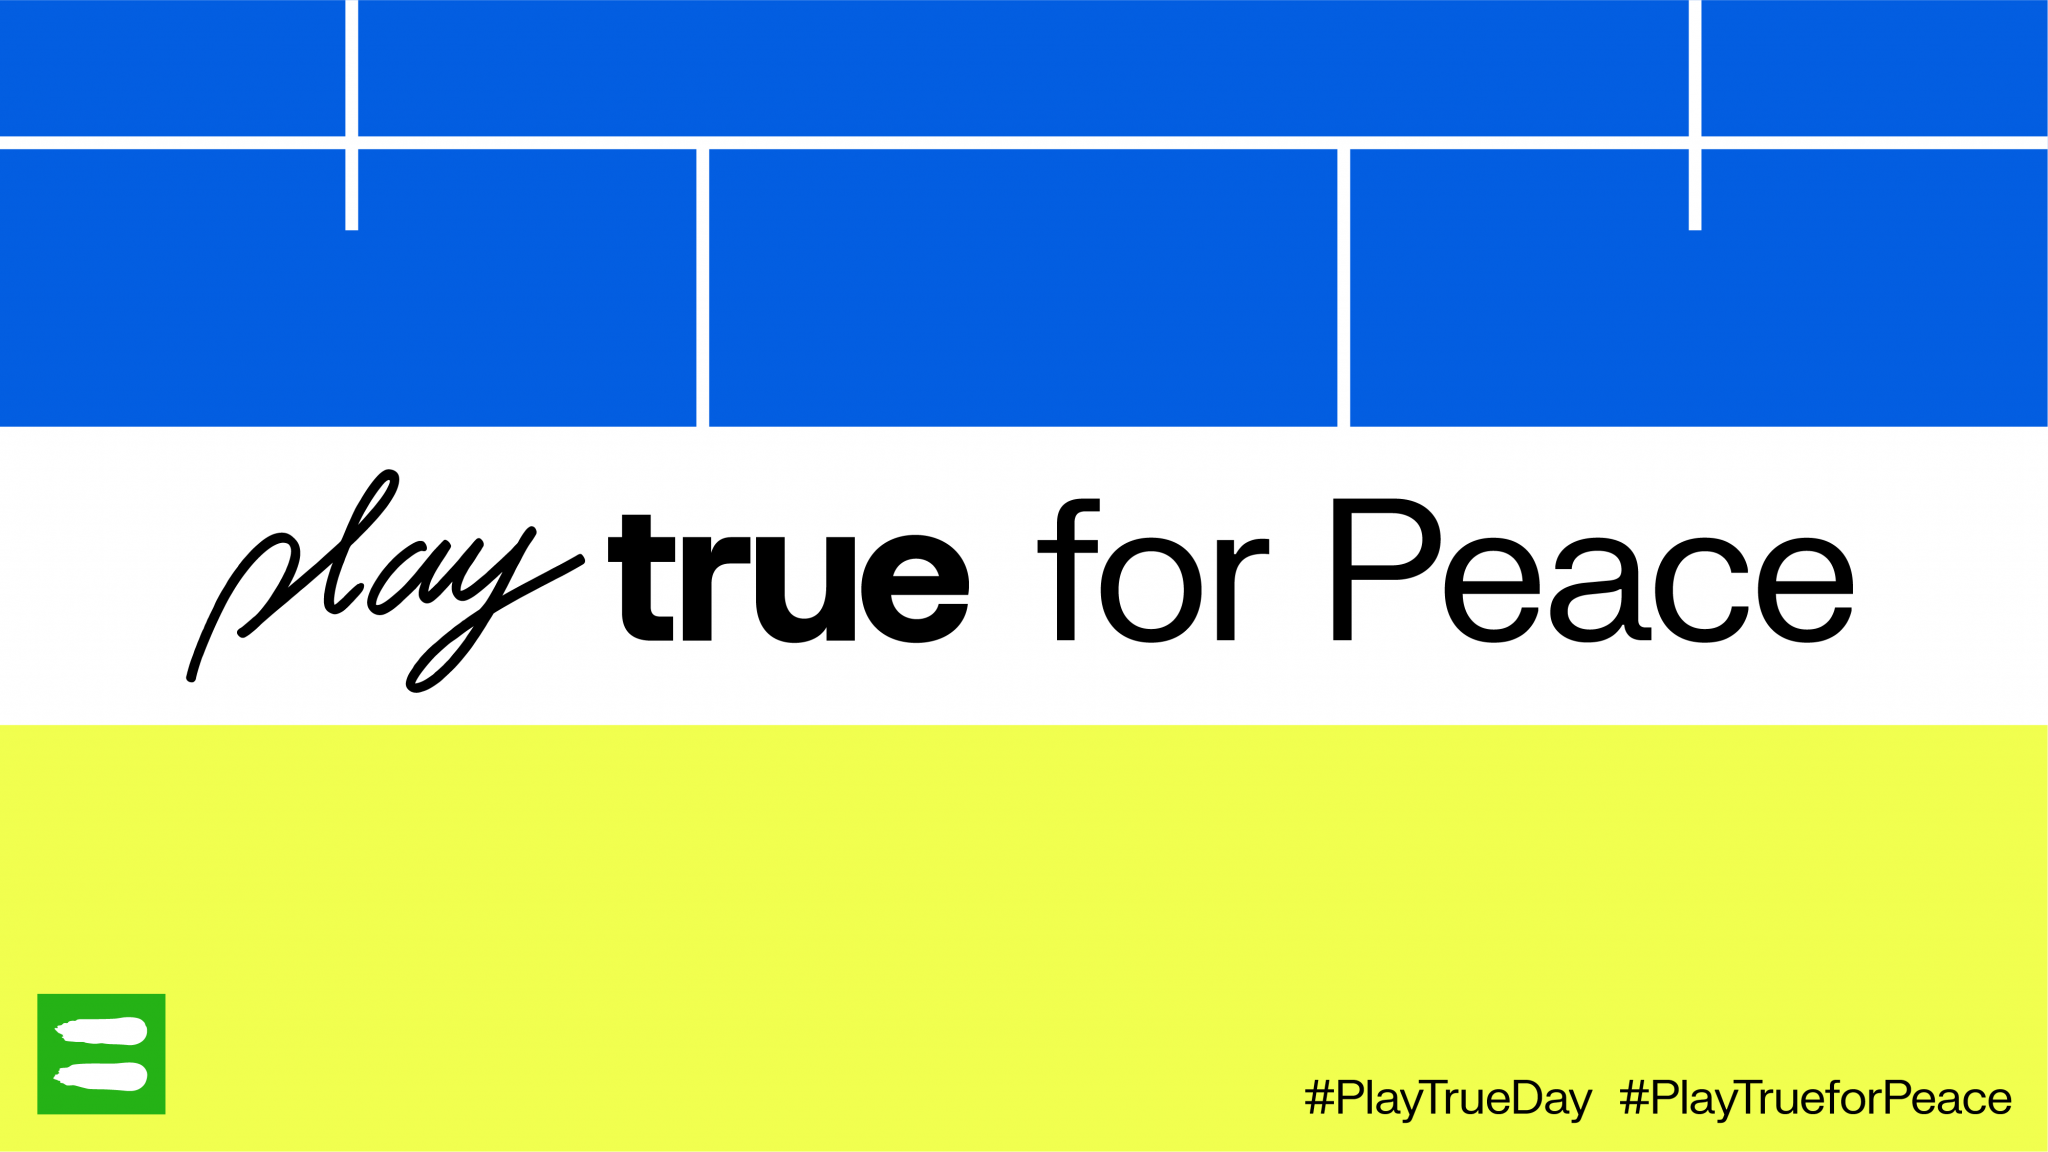 WADA calls on world to "Play True for Peace"